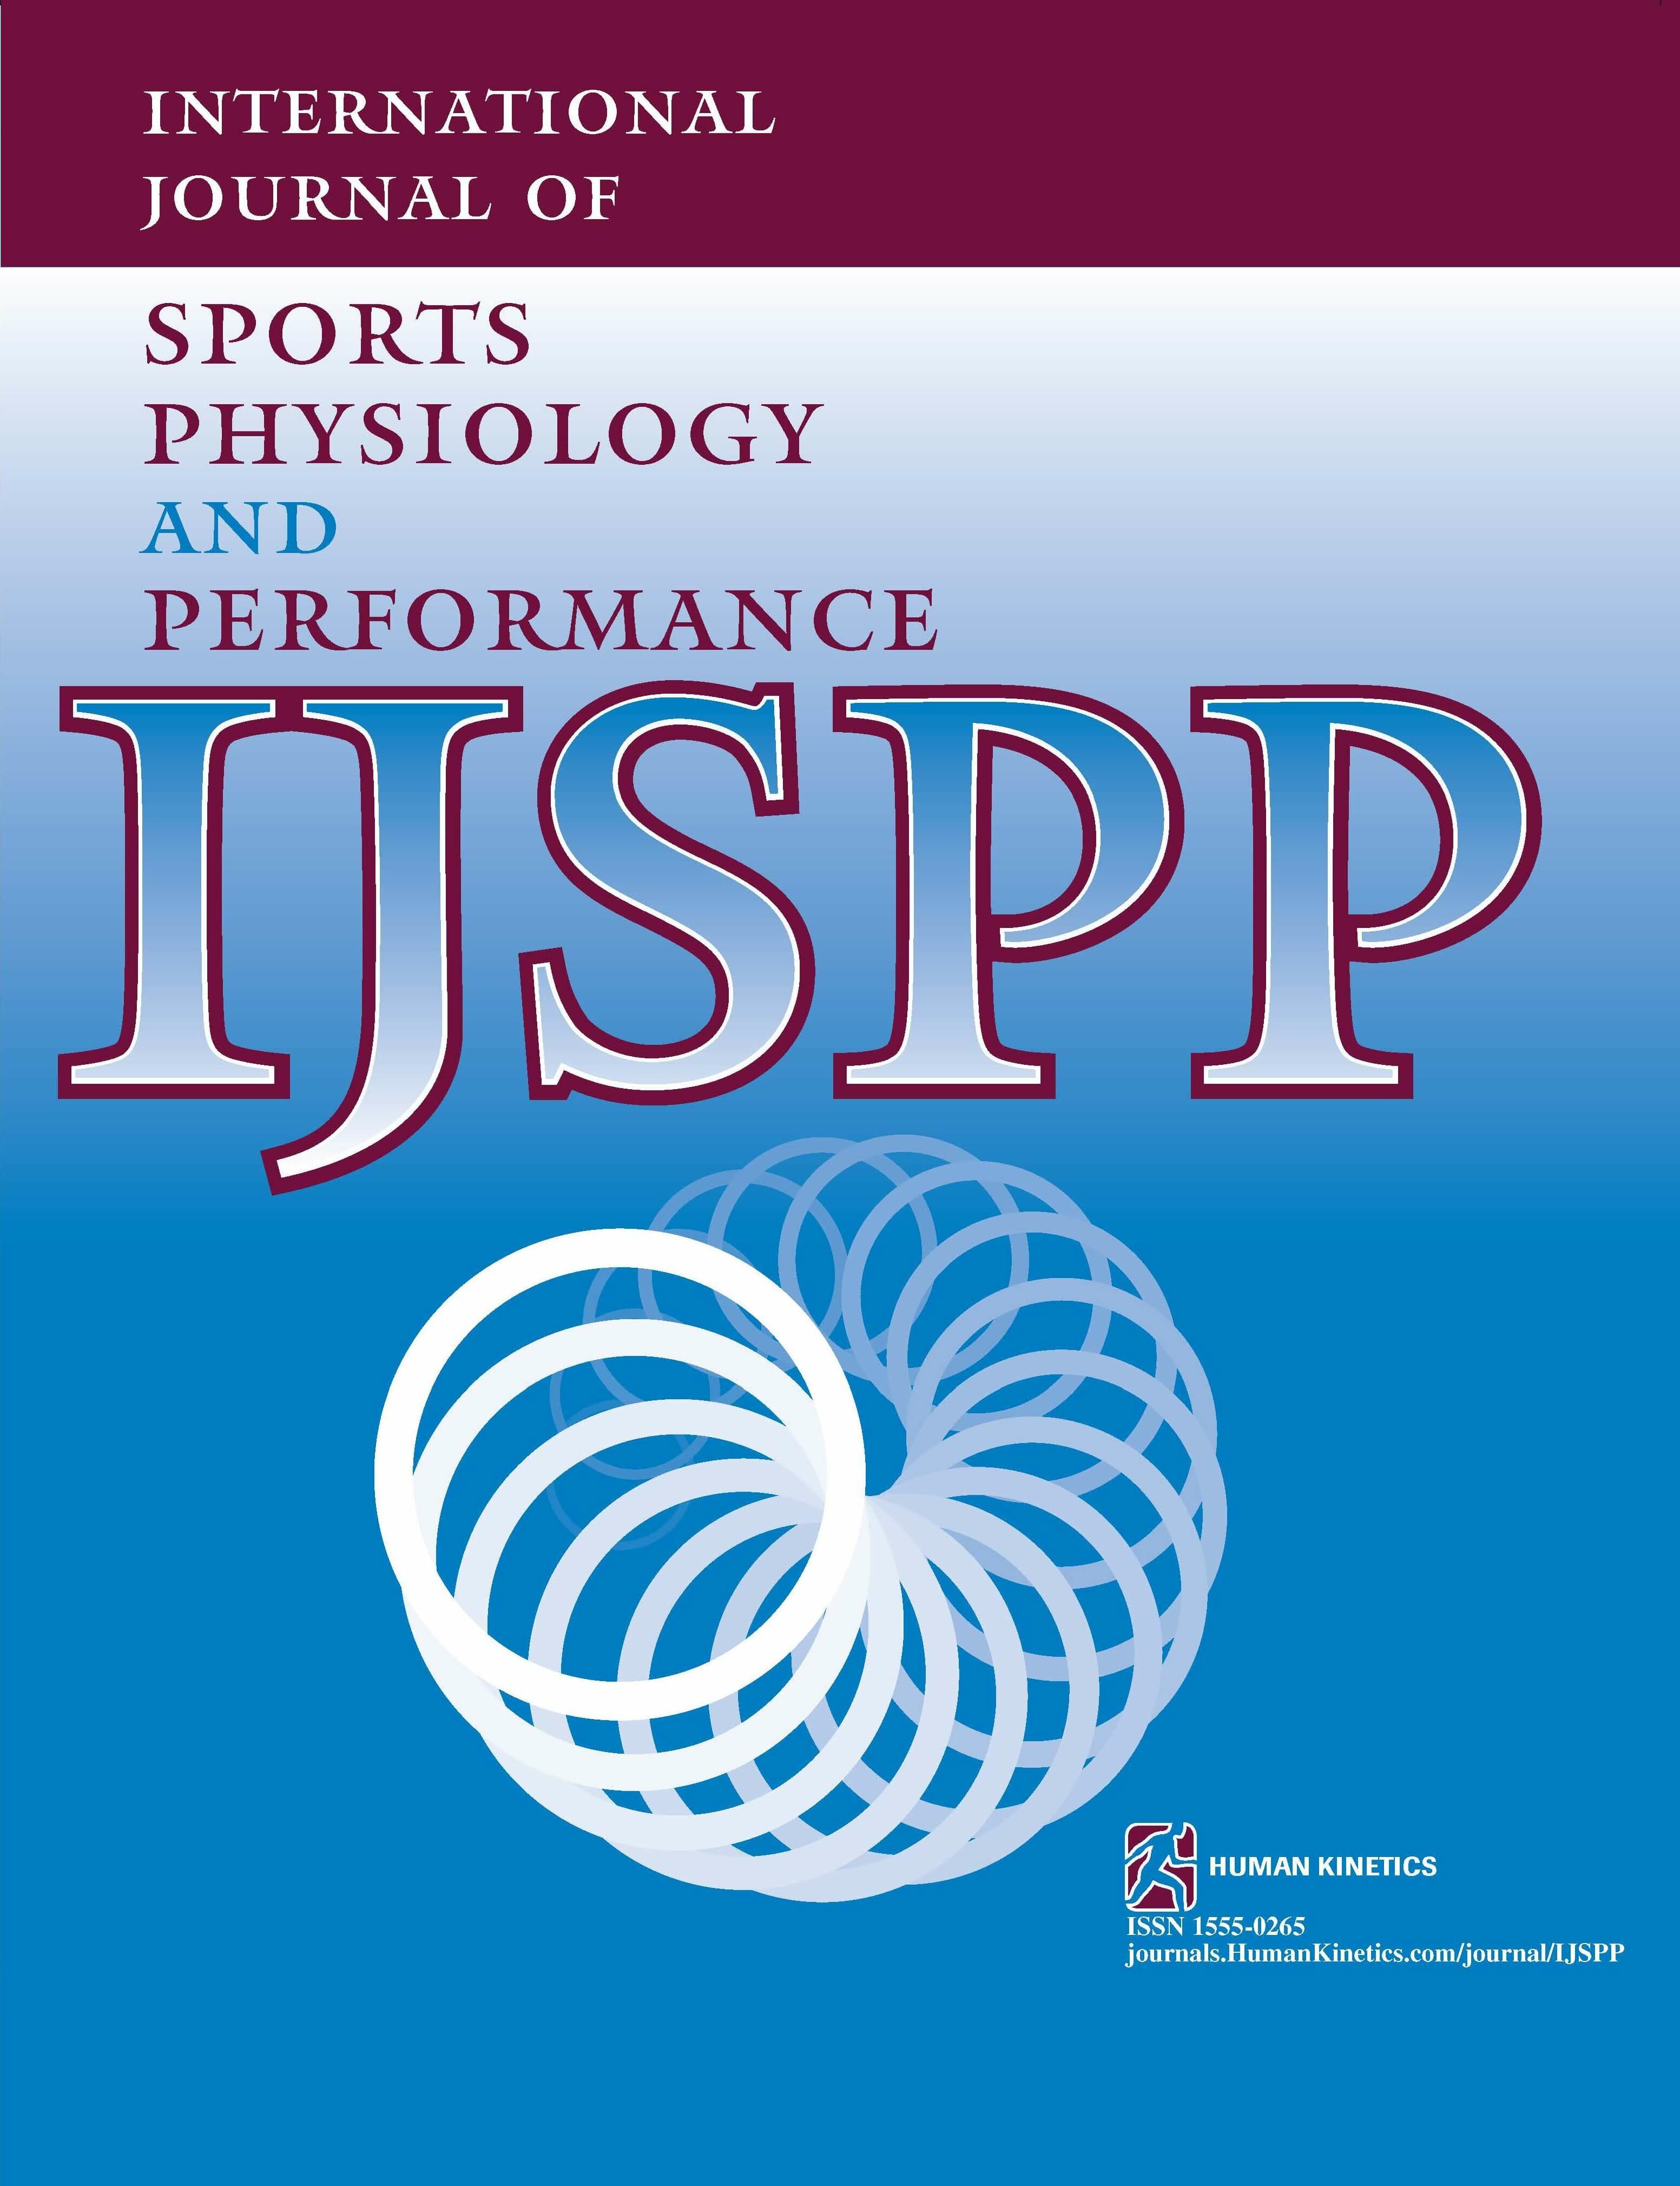 Physiological Responses and Performance During a 3-Minute Cycle Time Trial: Standard Paced Versus All-Out Paced